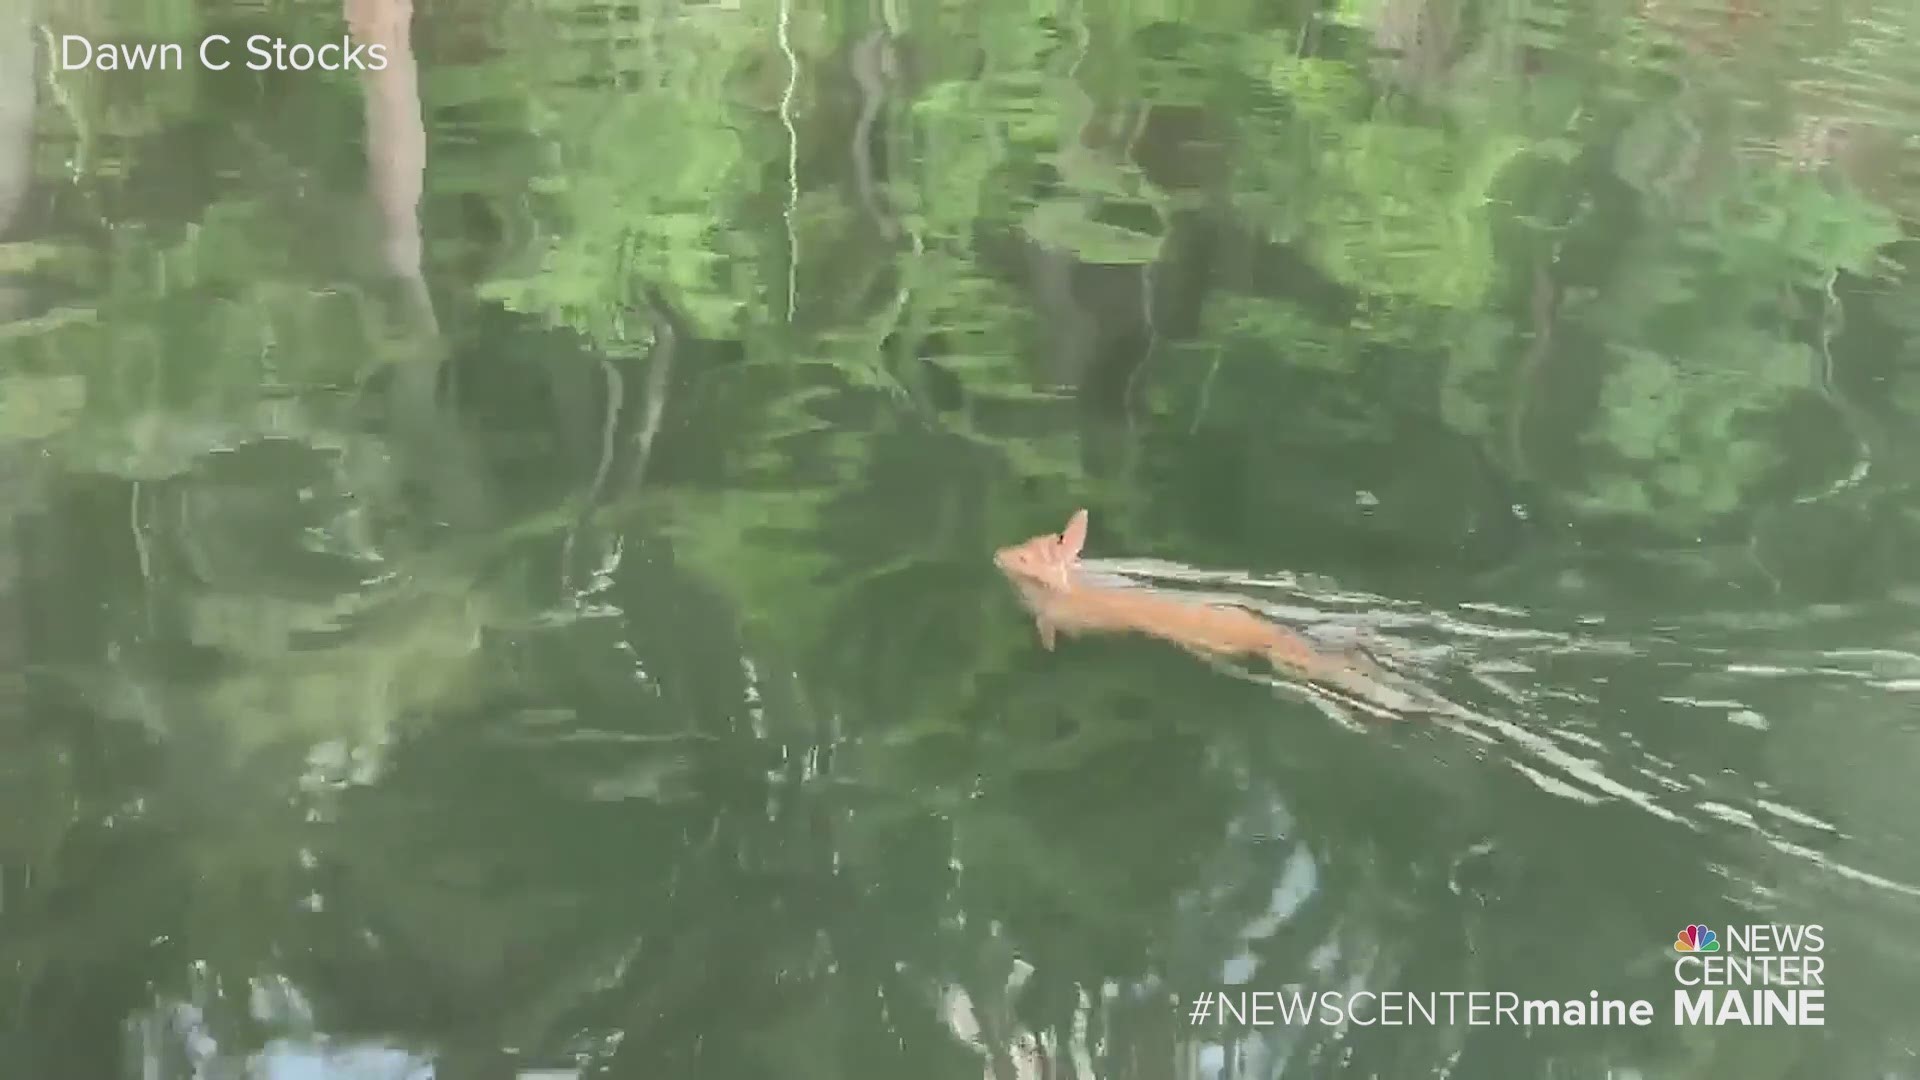 A woman by the name of Dawn came to this swimming fawn's rescue on Wednesday, July 3.